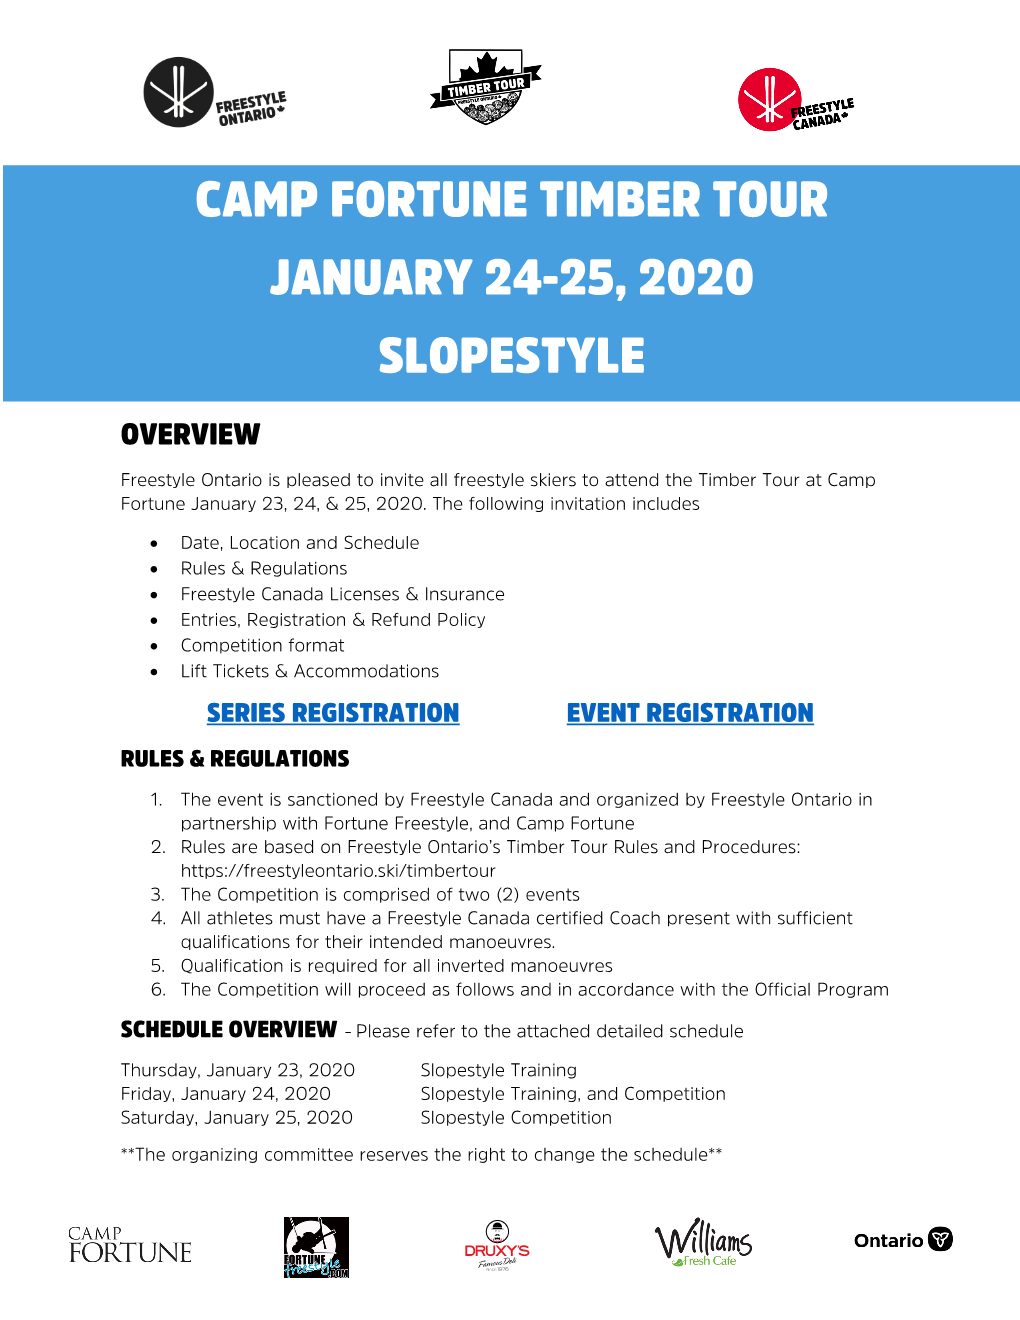 Camp Fortune Timber Tour January 24-25, 2020